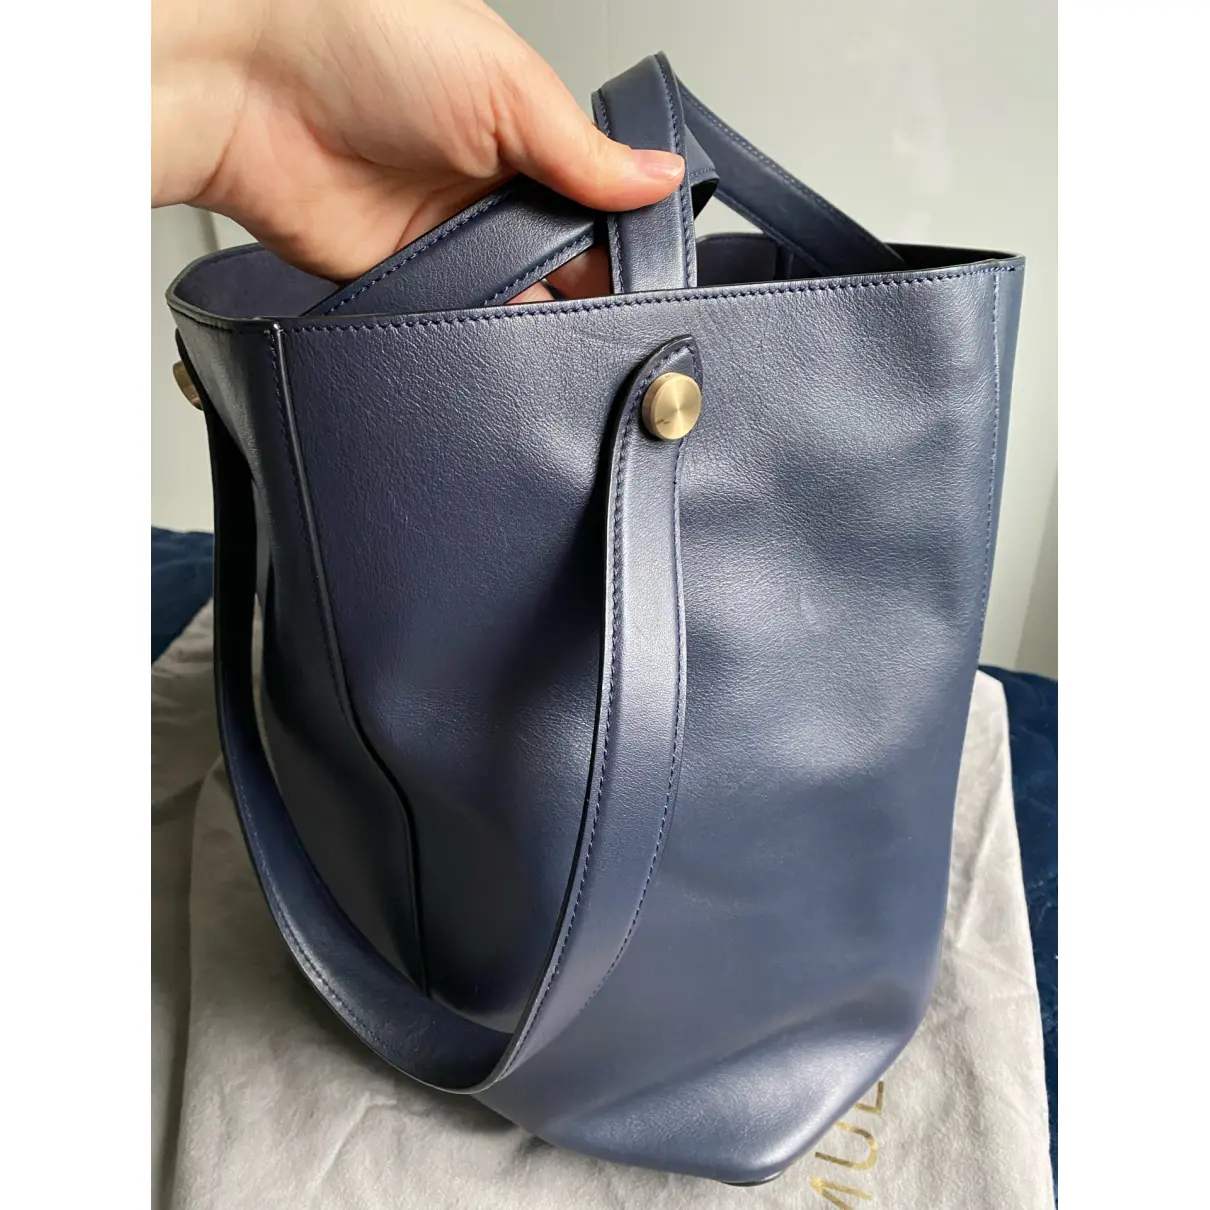 Kite leather tote Mulberry